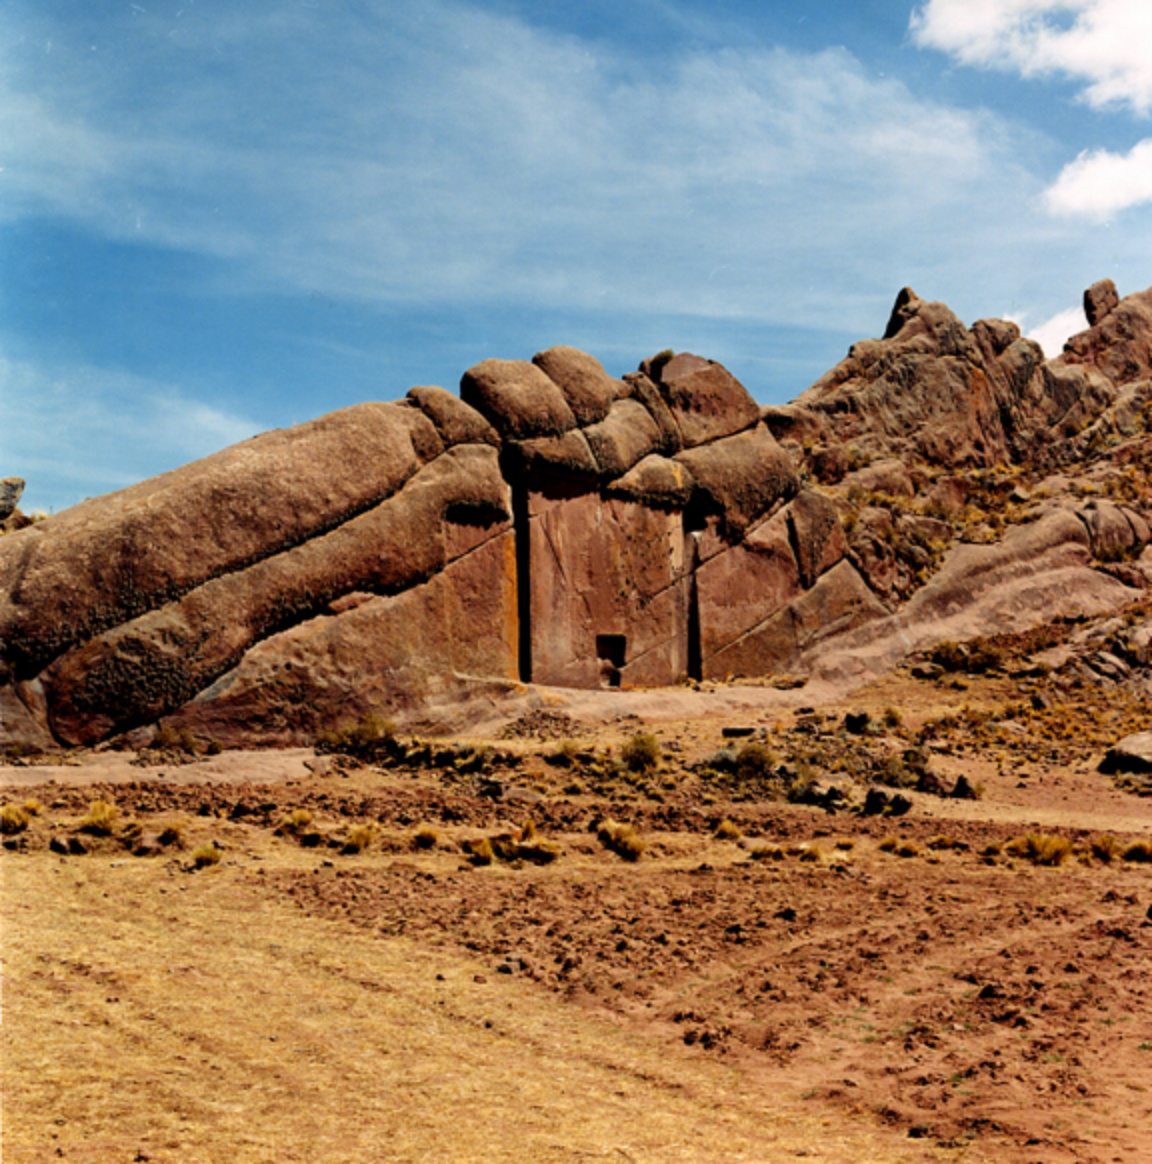 The doorway of Aramu Muru in southern Peru near Lake Titicaca. This doorway is believed to be made by ancients who used it to travel to alternative locations, both planetary (Earth) and extra-planetary.